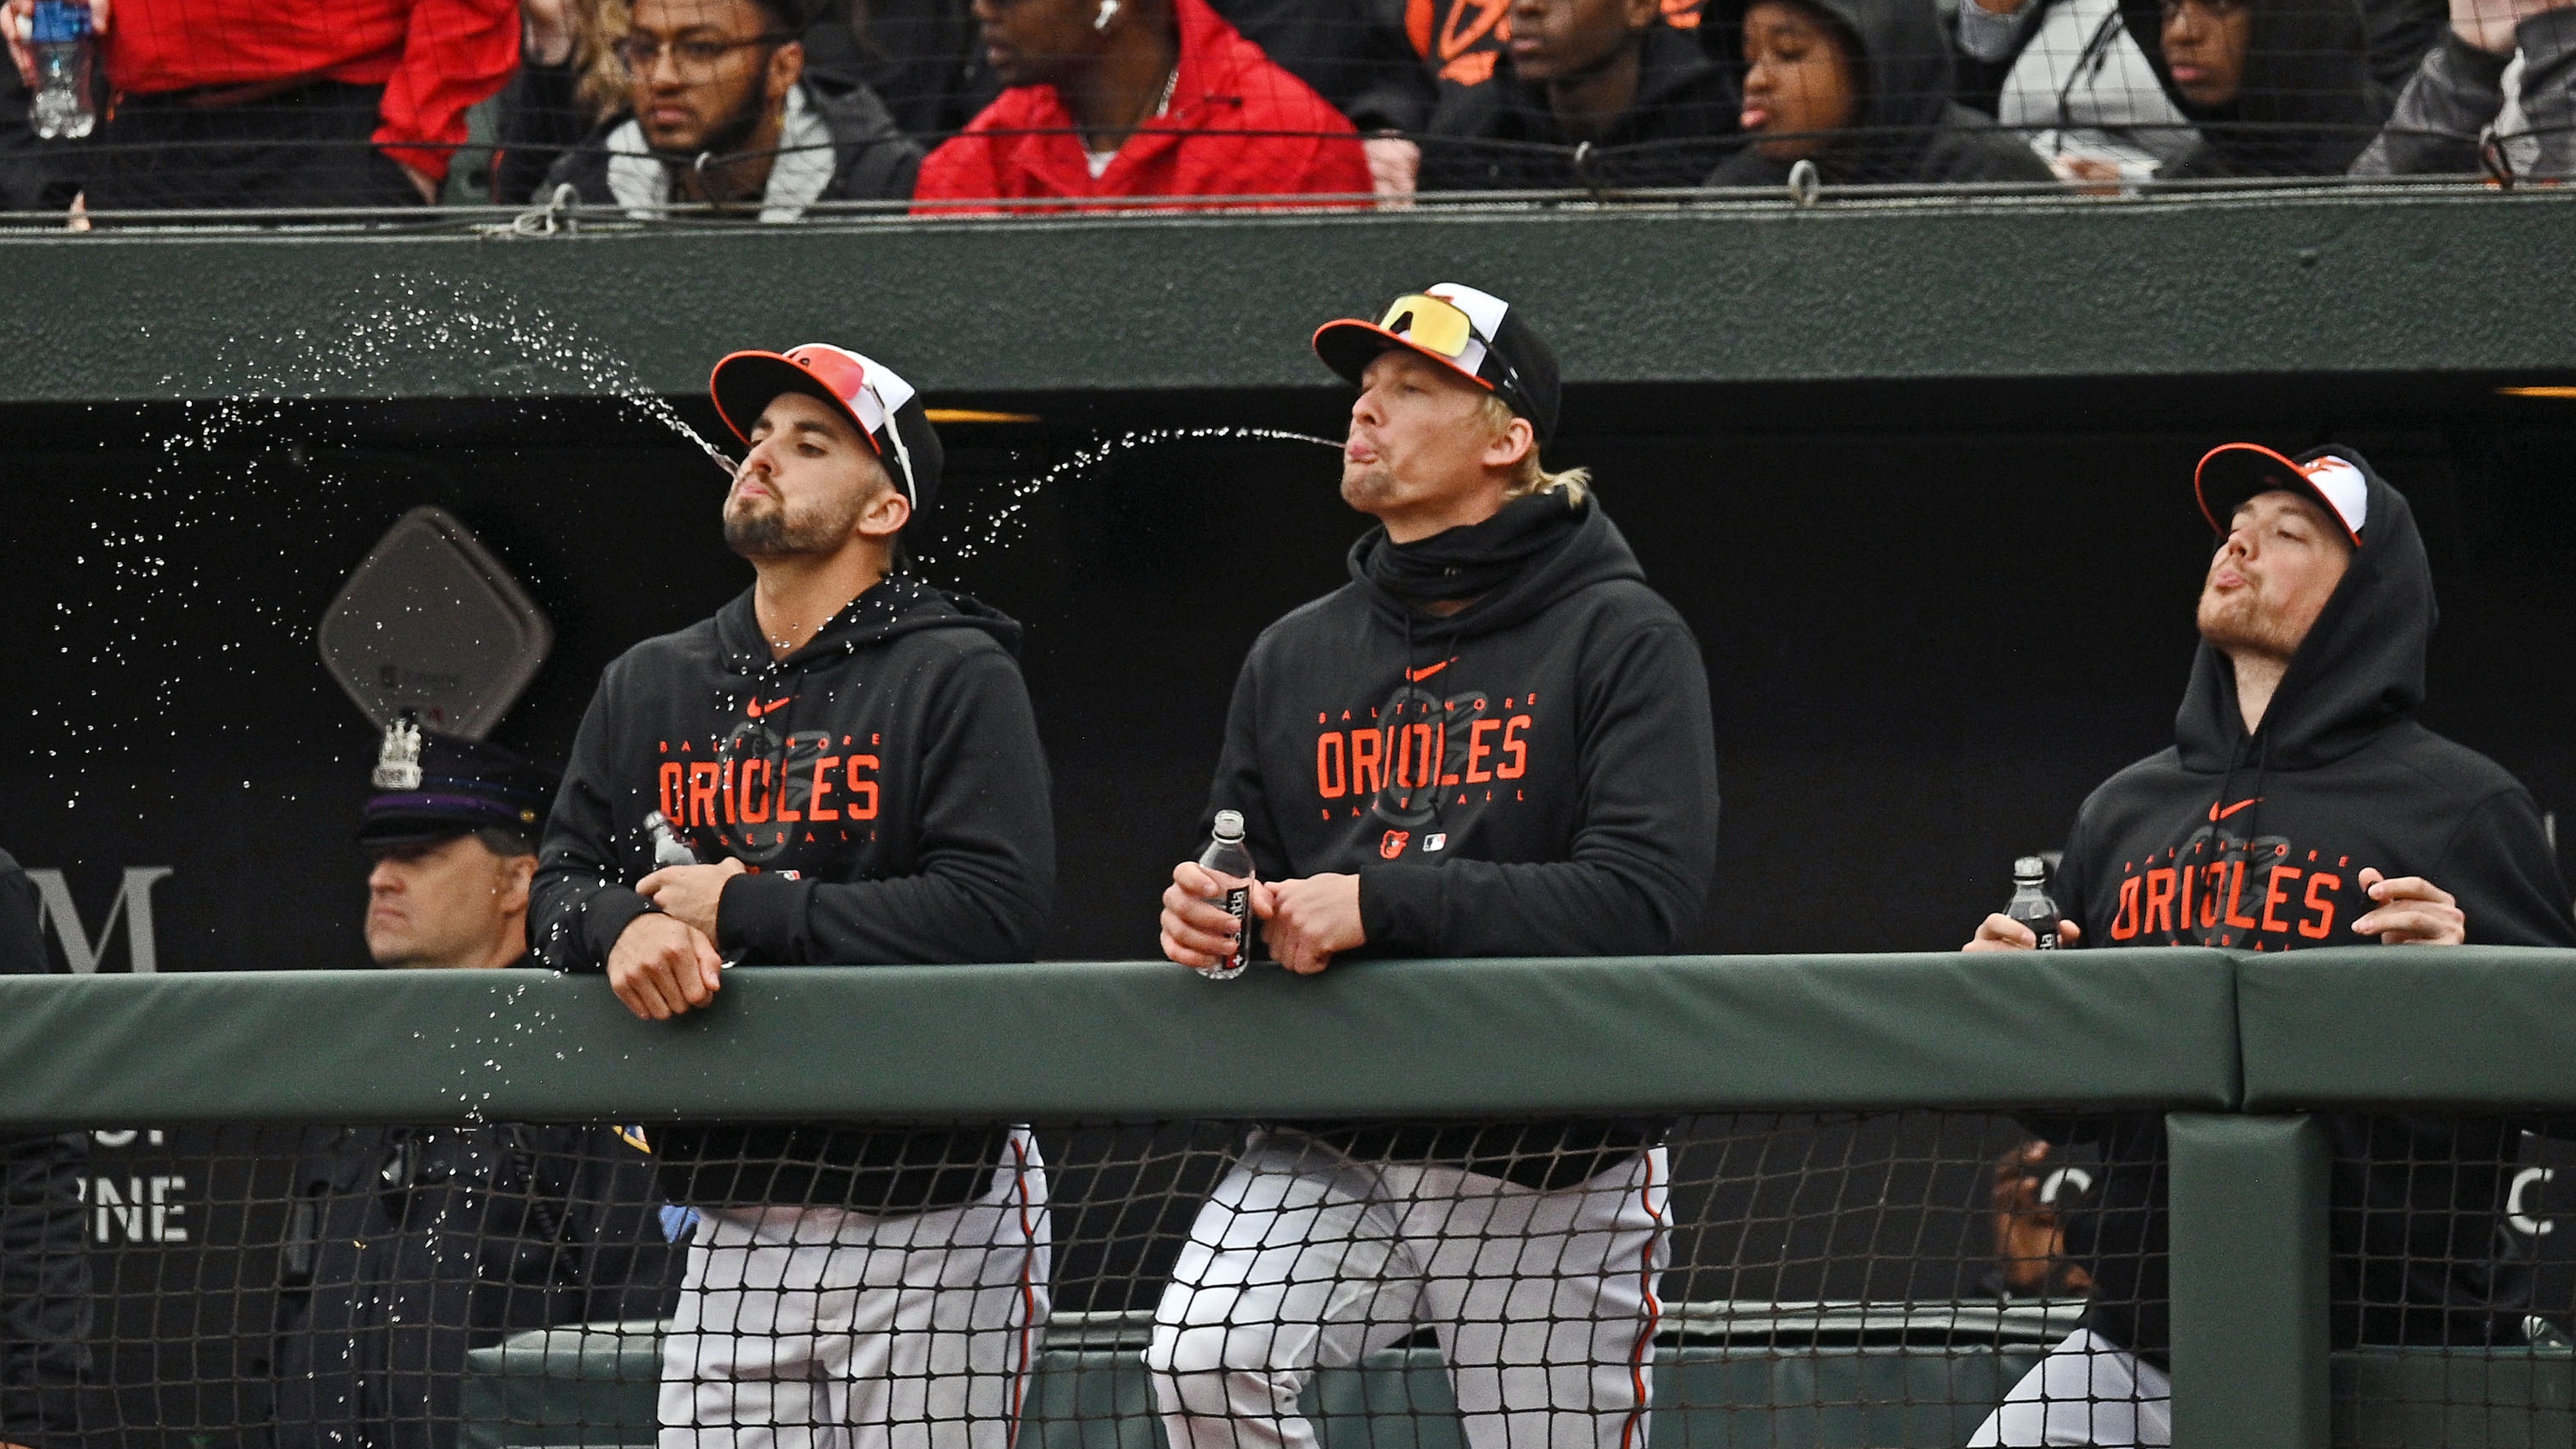 The Baltimore Orioles Are Staying Hydrated With a DIY Beer Bong